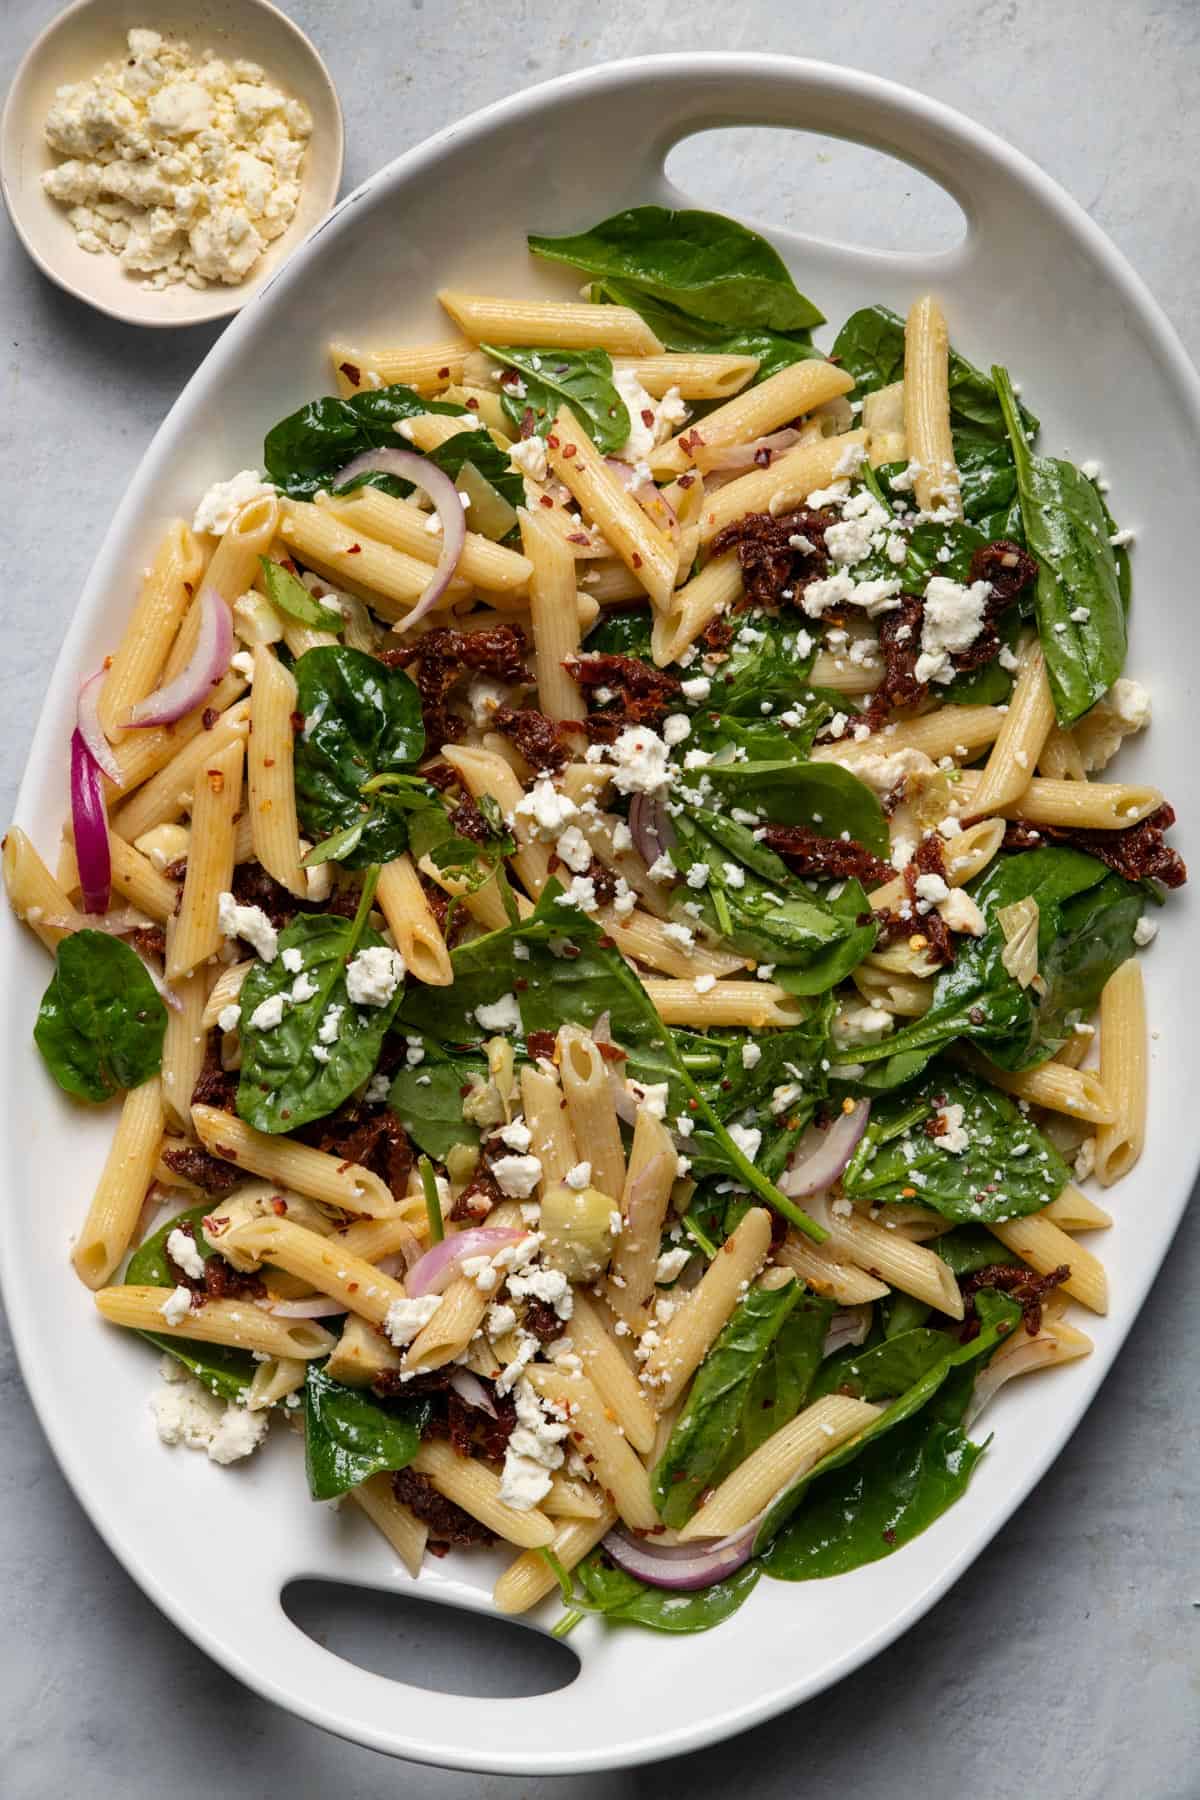 Easy and Cold Pasta Salad Recipes - Spinach Pasta Salad